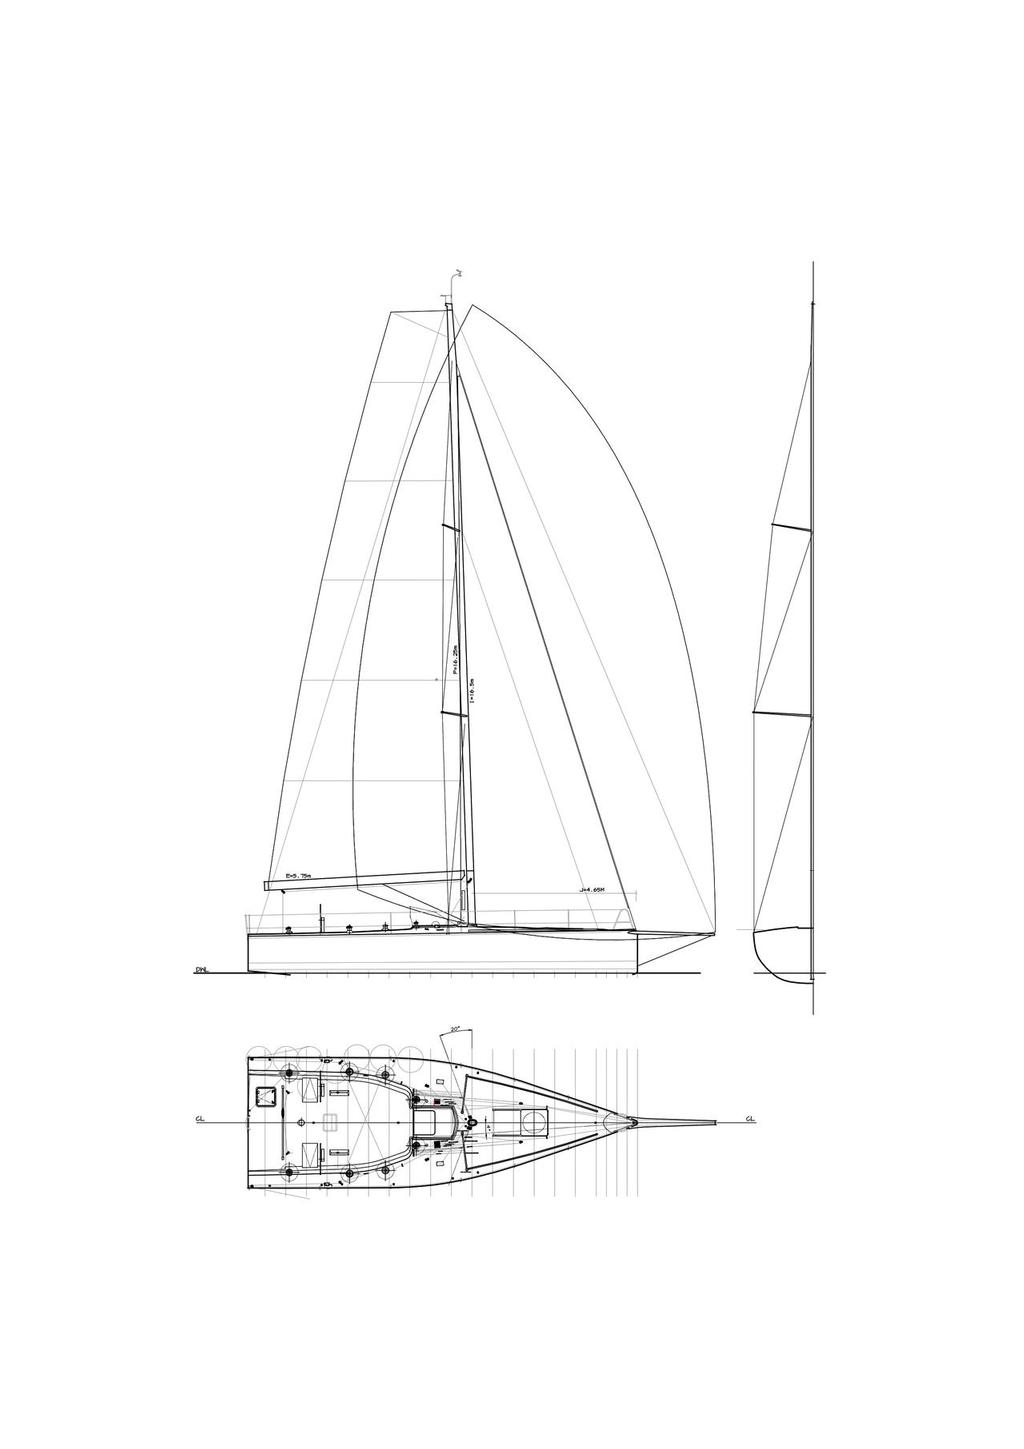 YD37 Lines and Sail Plan by Bakewell-White Yacht Design © Bakewell-White Yacht Design www.bakewell-white.com/